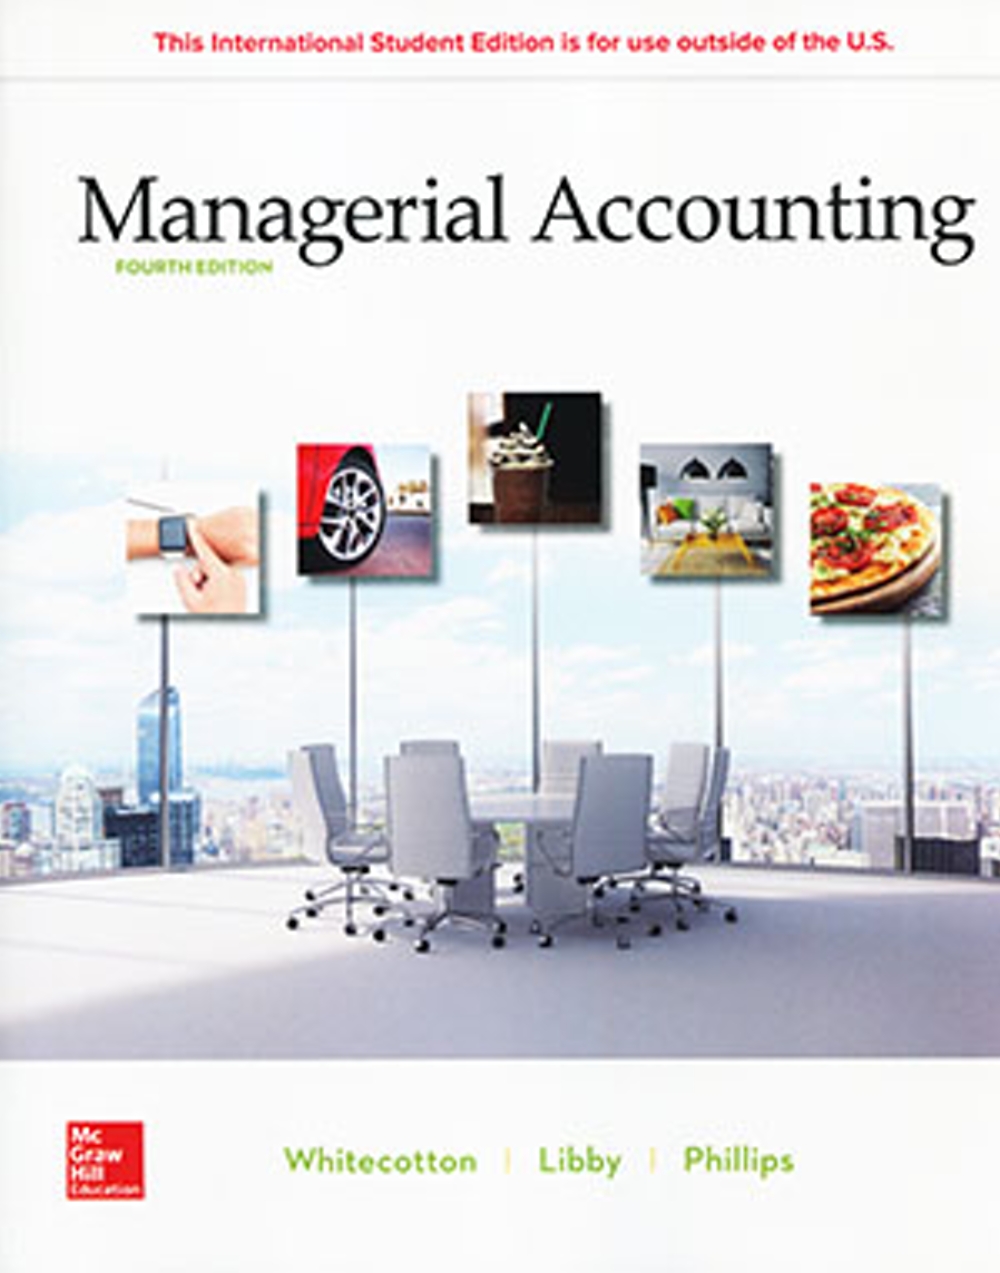 Managerial Accounting (4版)